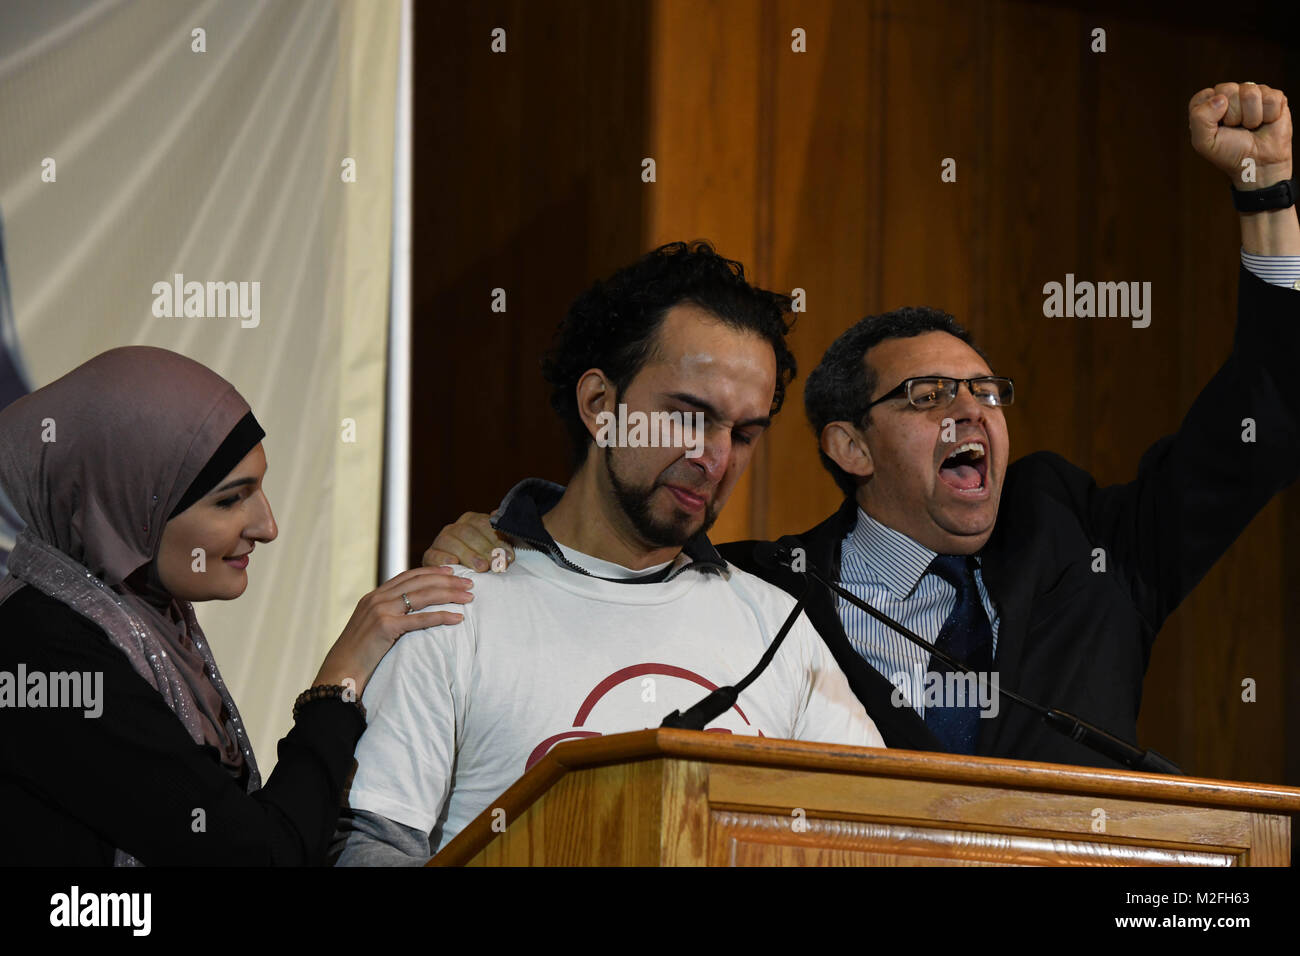 Washington, District of Columbia, USA. 7th Feb, 2018. Dreamer MISSAEL GARCIA, cries at the podium, Linda Sarsour from Women's March and Gustavo Torres, from CASA comfort him as Immigration activists demonstrate at Lutheran Church of the Reformationl in Washington DC Wednesday, as the Senate agreed to a deal to avoid a shutdown that does not include provisions for so-called Dreamers sought by Democrats. Credit: Miguel Juarez Lugo/ZUMA Wire/Alamy Live News Stock Photo